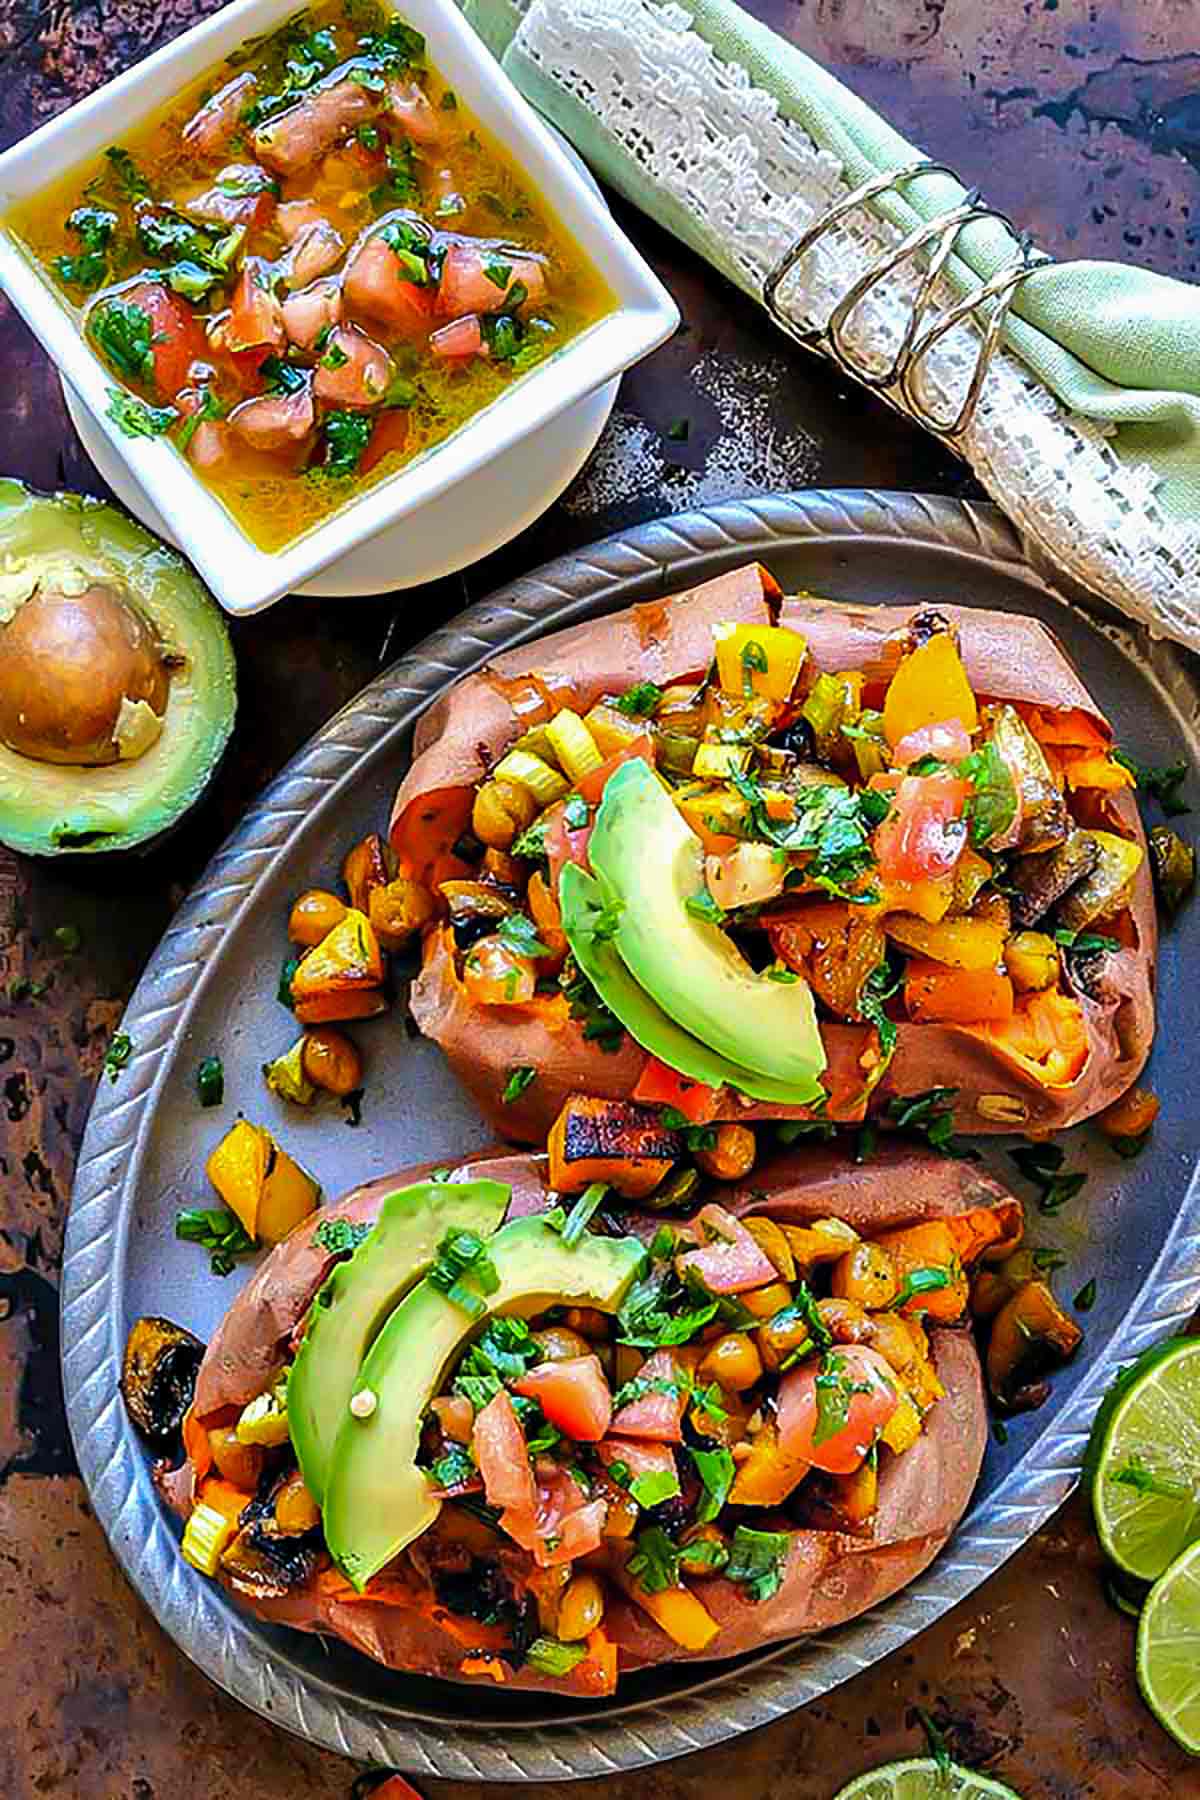 overview of baked stuffed yams with veggies and topped with salsa